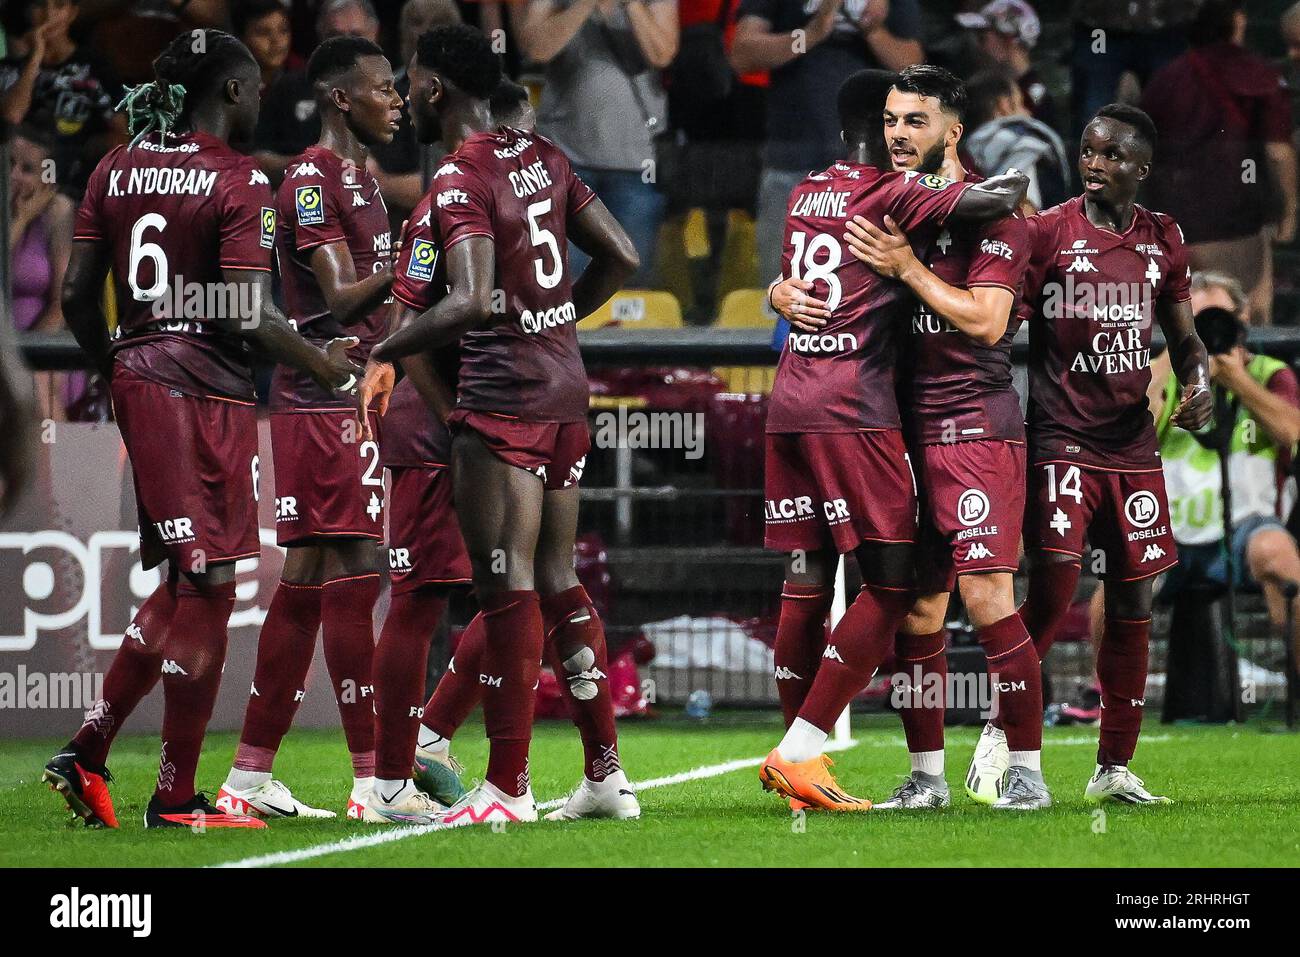 FC Metz - FC Metz updated their cover photo.